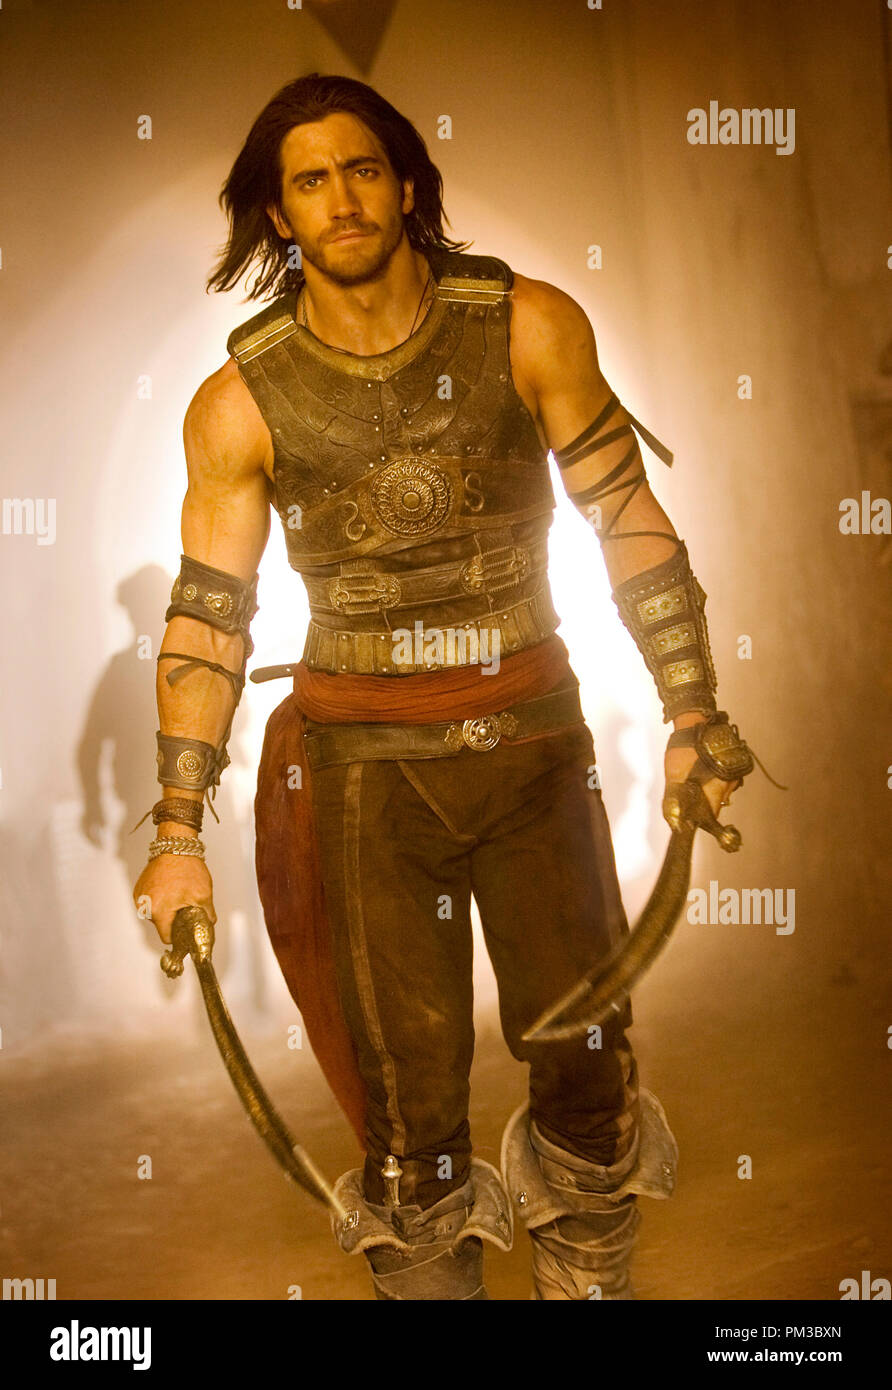 'PRINCE OF PERSIA: THE SANDS OF TIME'  Jake Gyllenhaal  Ph: Andrew Cooper, SMPSP  © Disney Enterprises, Inc. and Jerry Bruckheimer, Inc. All rights reserved. Stock Photo